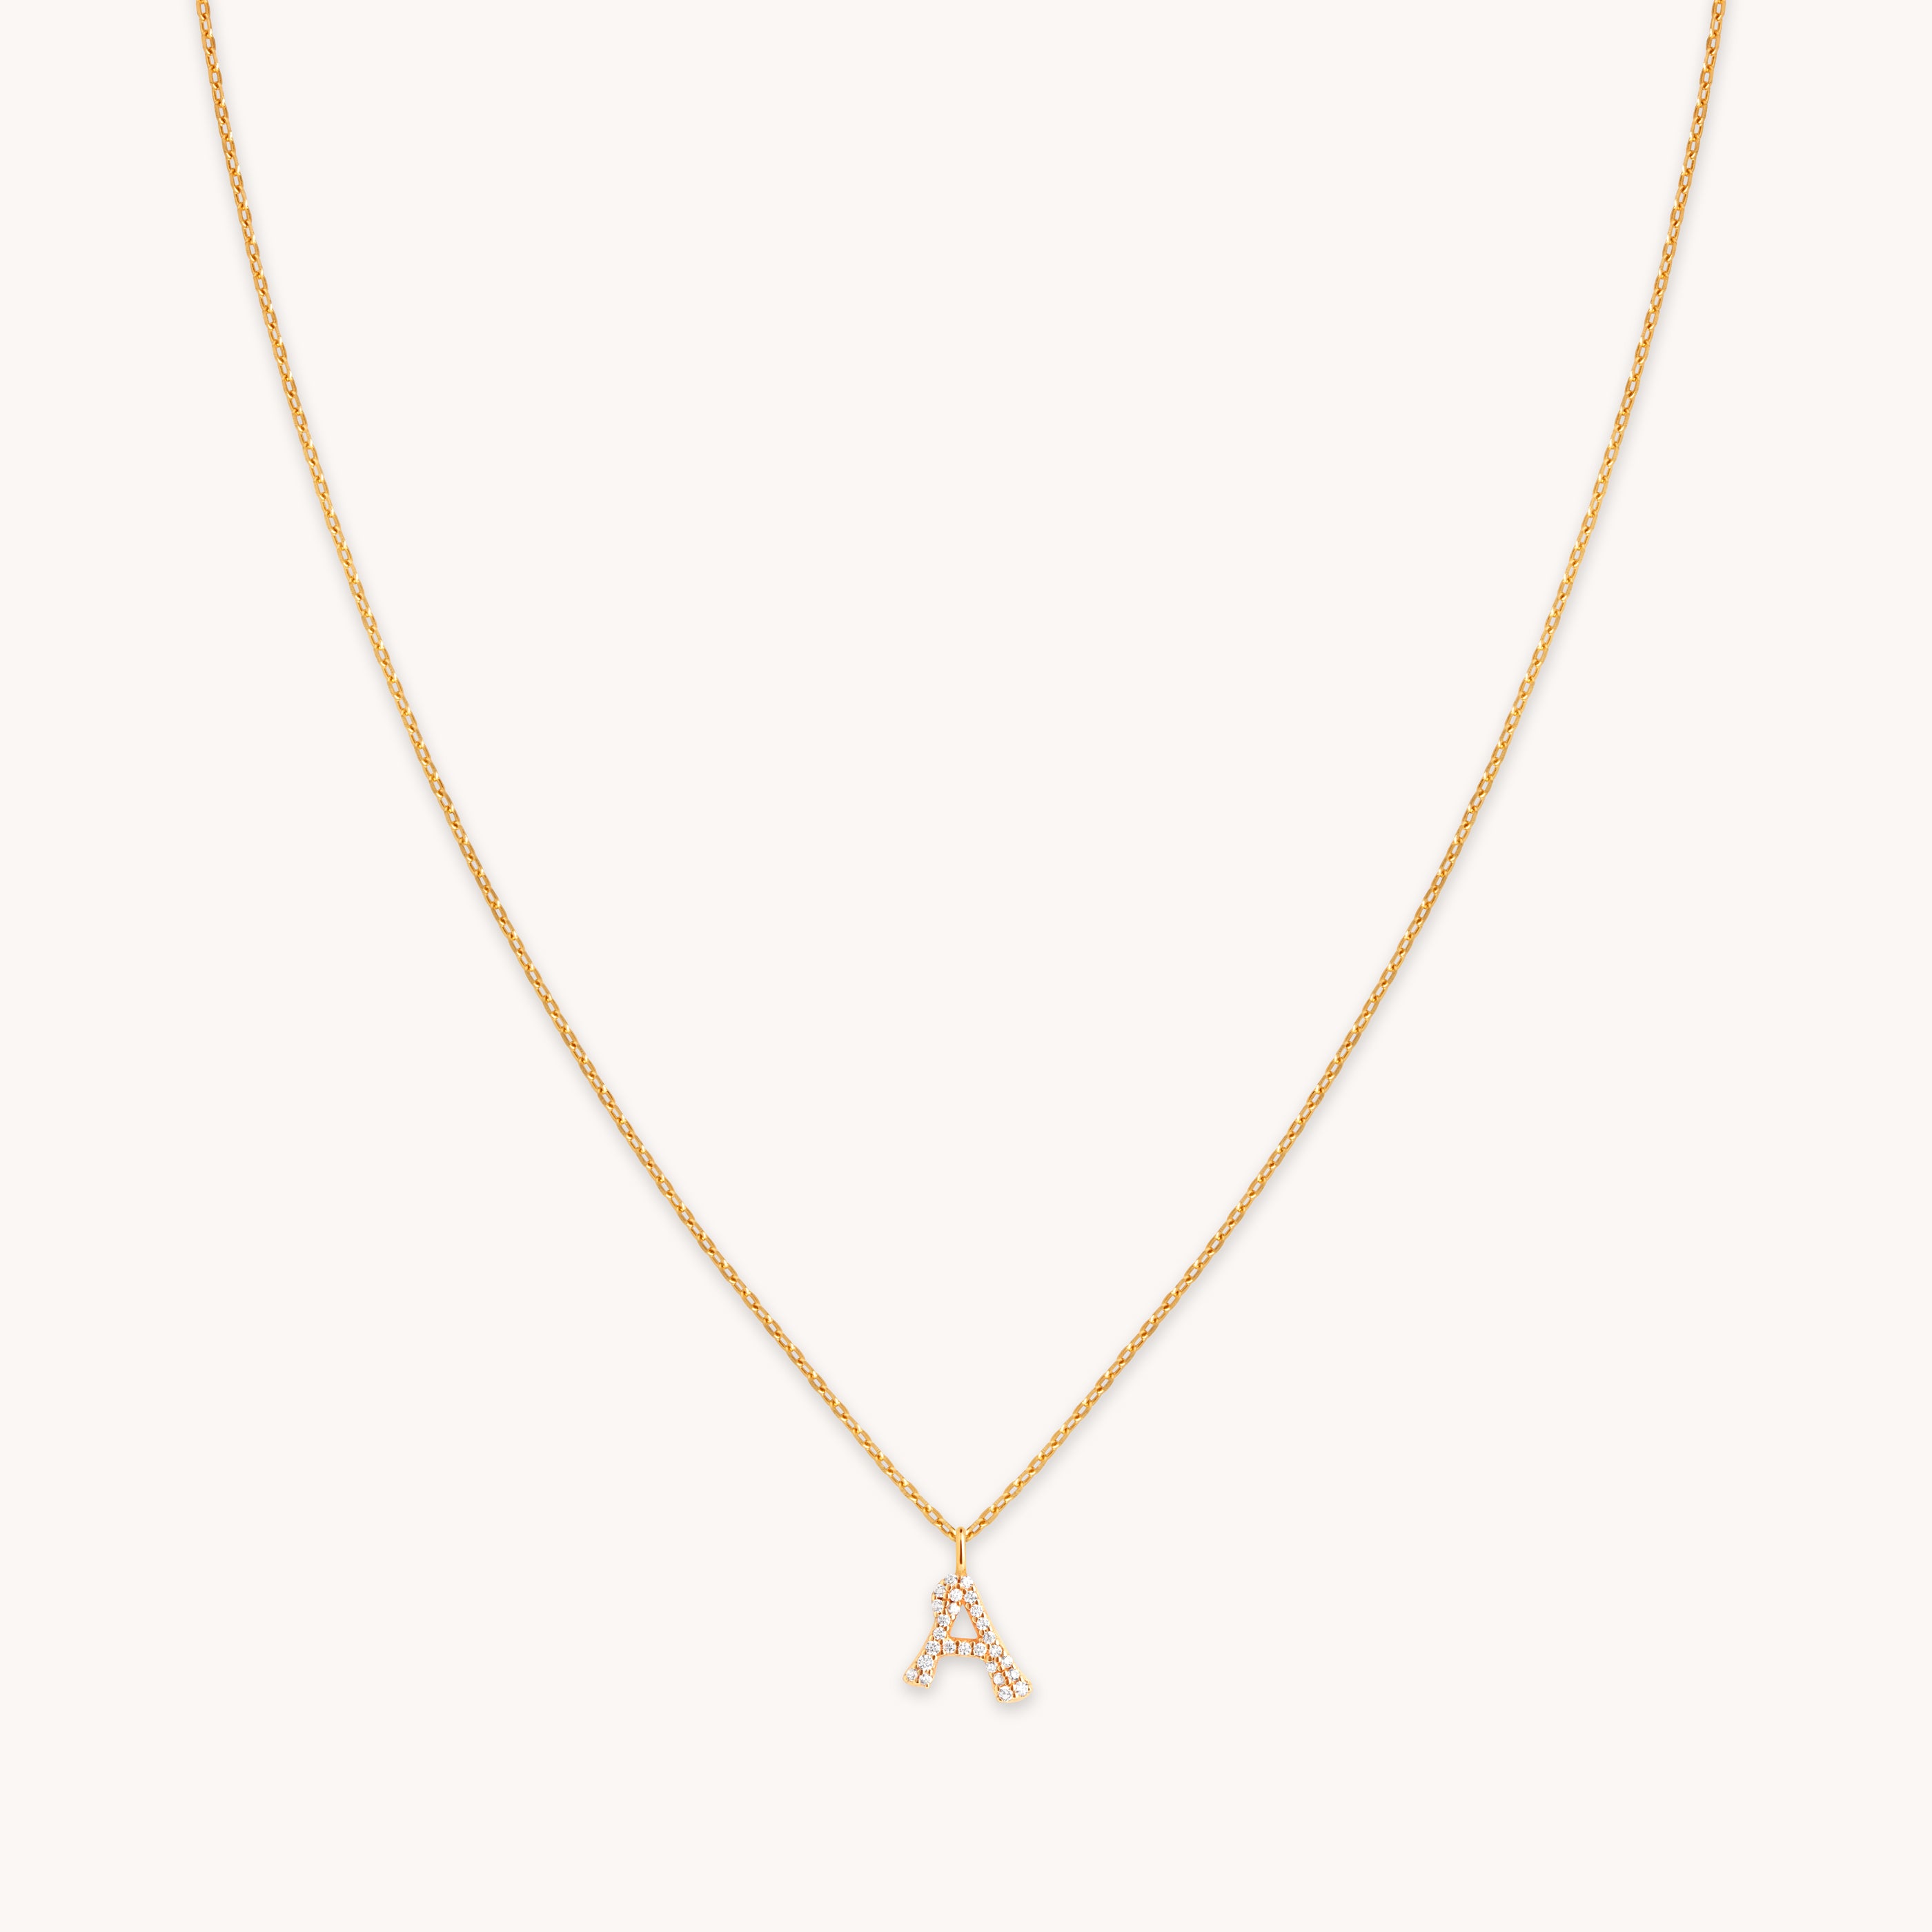 Necklaces in Gold, Silver & Rose Gold | Astrid & Miyu